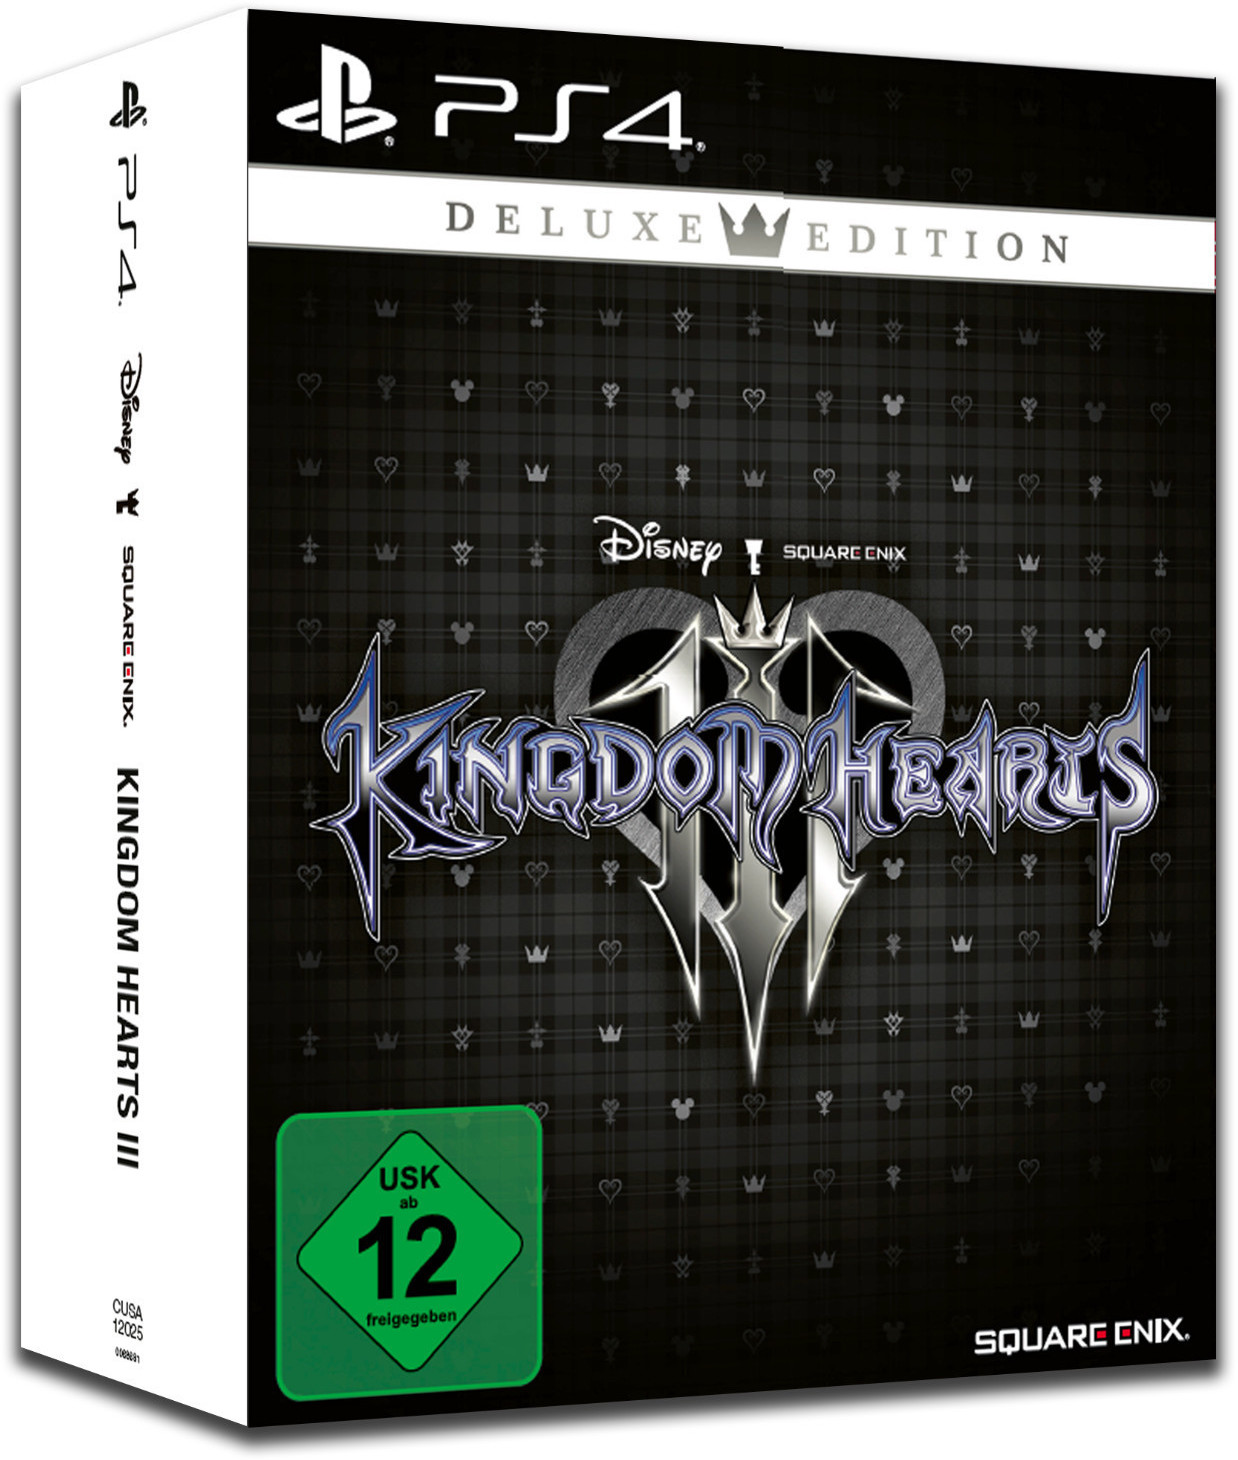 why is kingdom hearts 3 deluxe edition not available on amazon